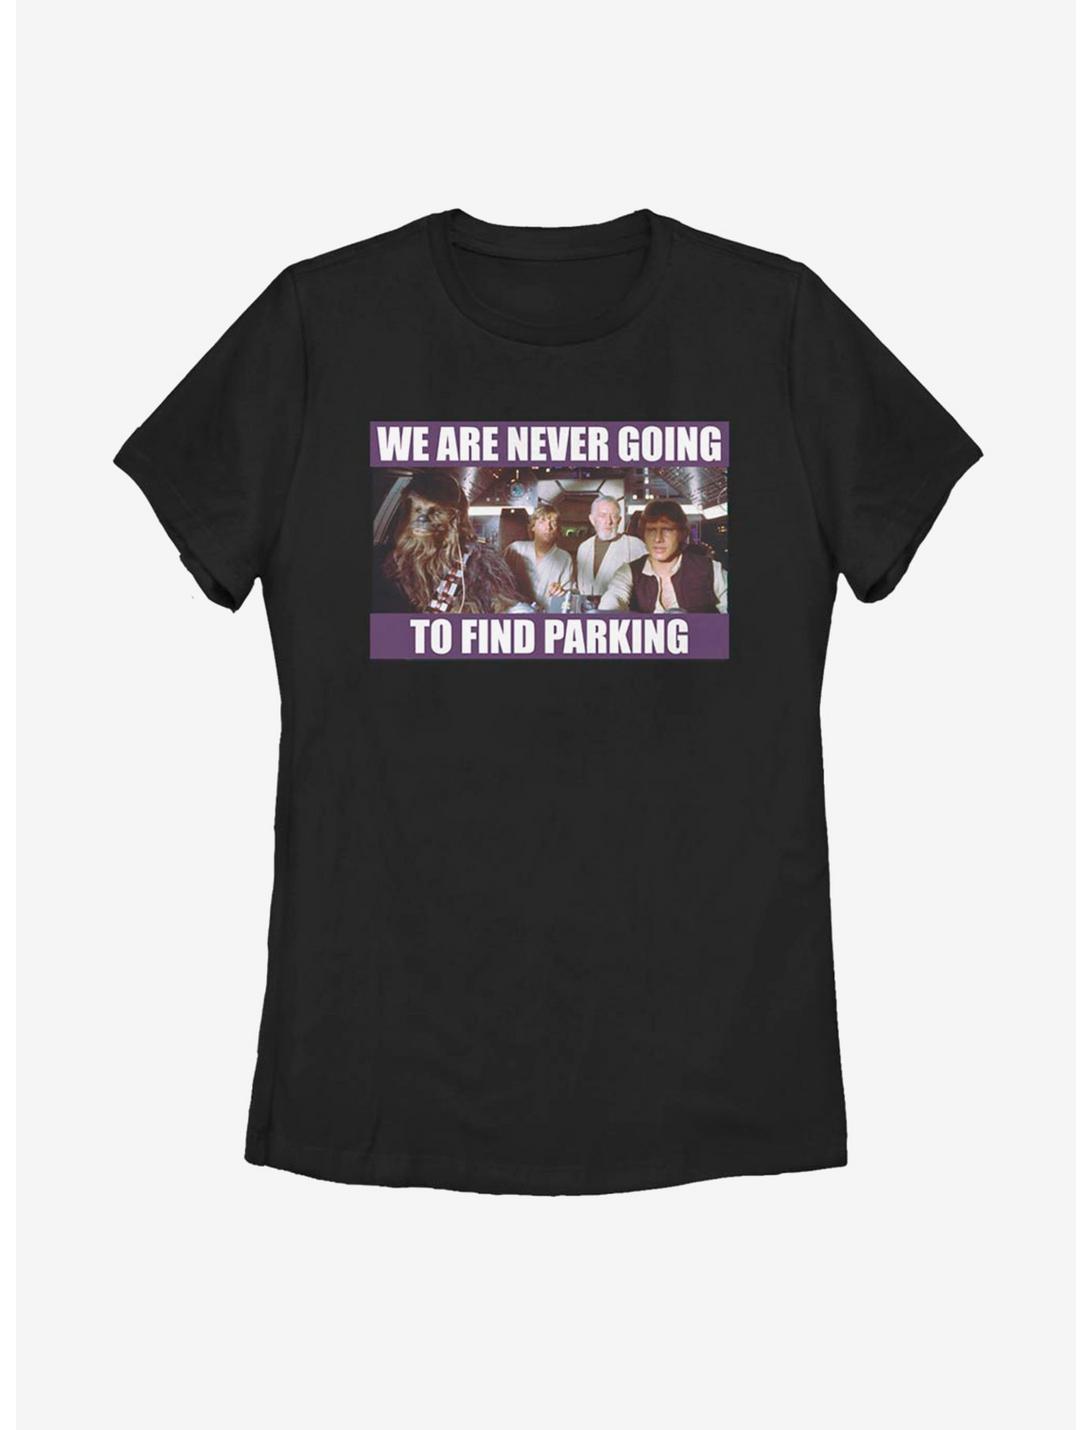 Plus Size Star Wars Never Going To Find Parking Womens T-Shirt, BLACK, hi-res